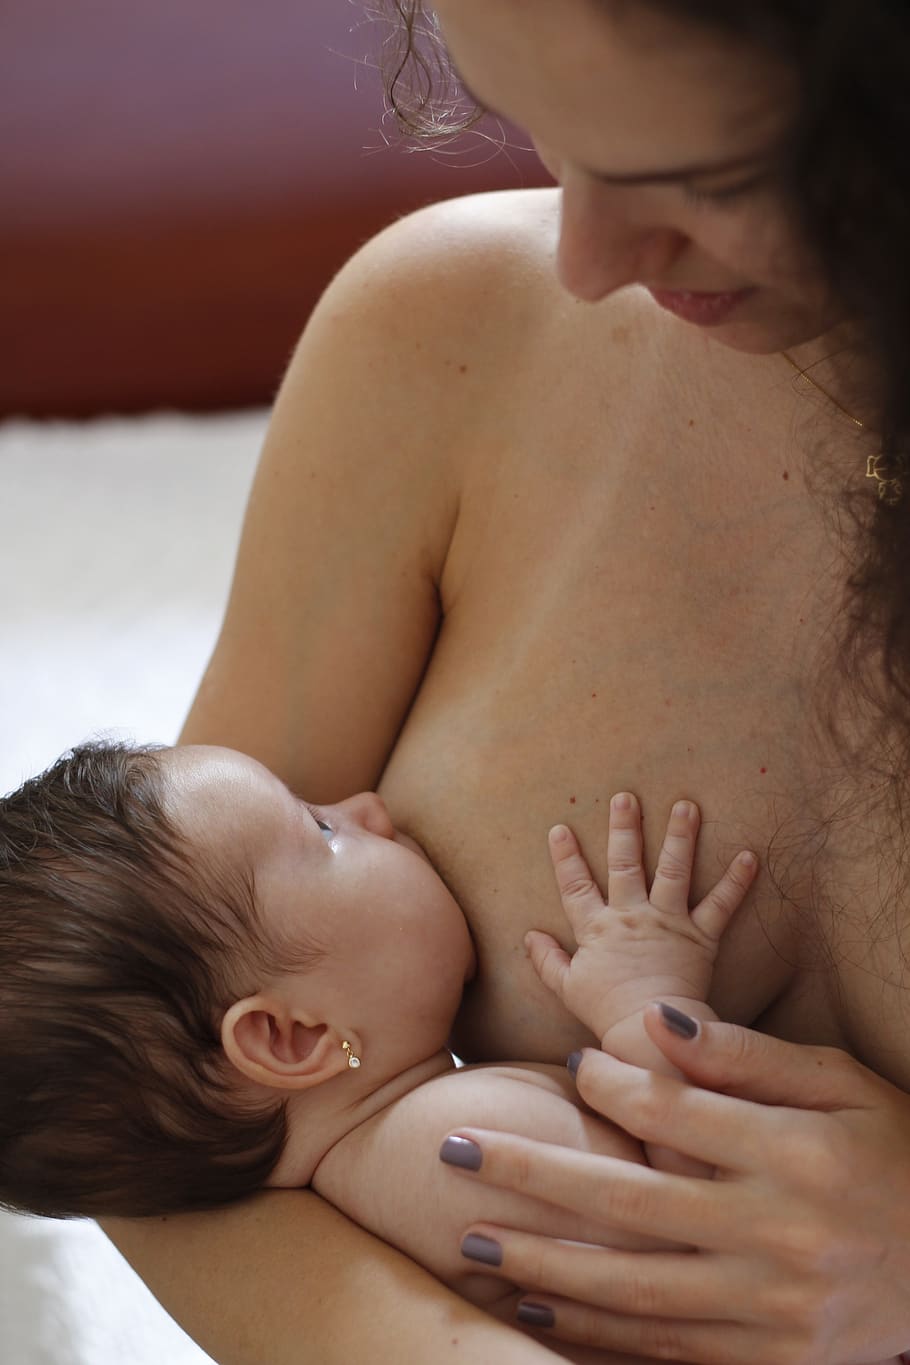 breastfeeding, mother, mother's love, child, shirtless, childhood, love, baby, togetherness, bonding